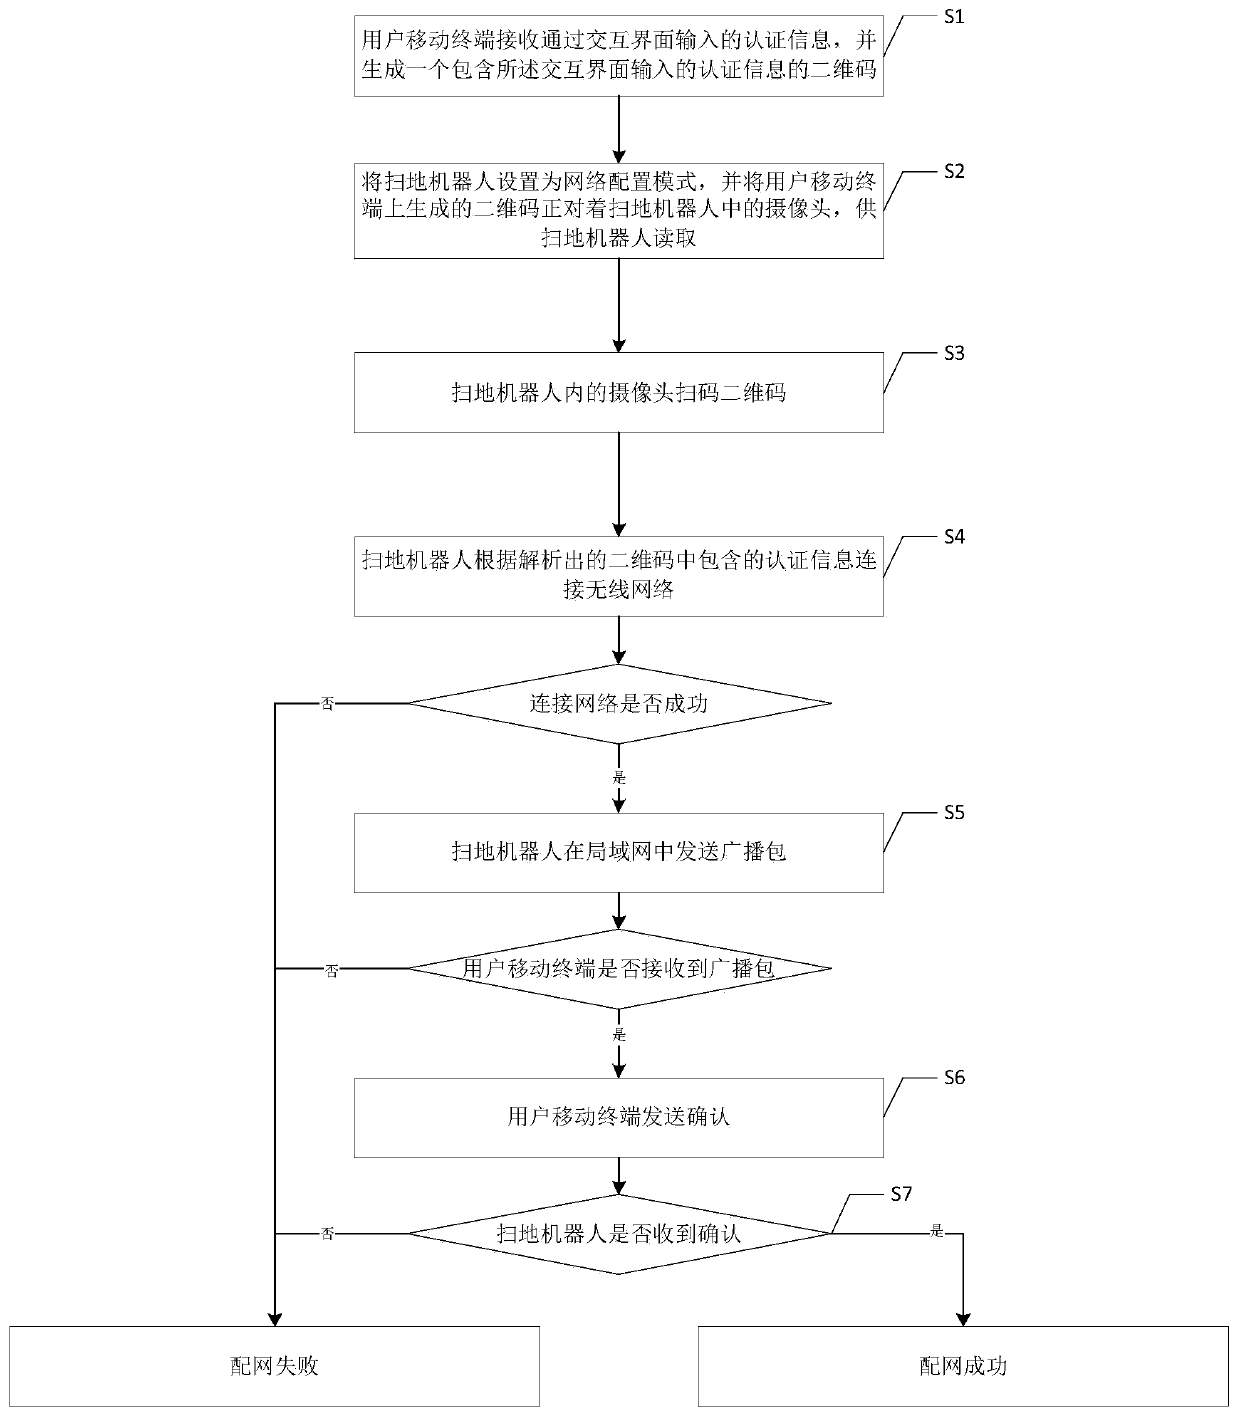 Method and system for configuring wireless network based on sweeping robot